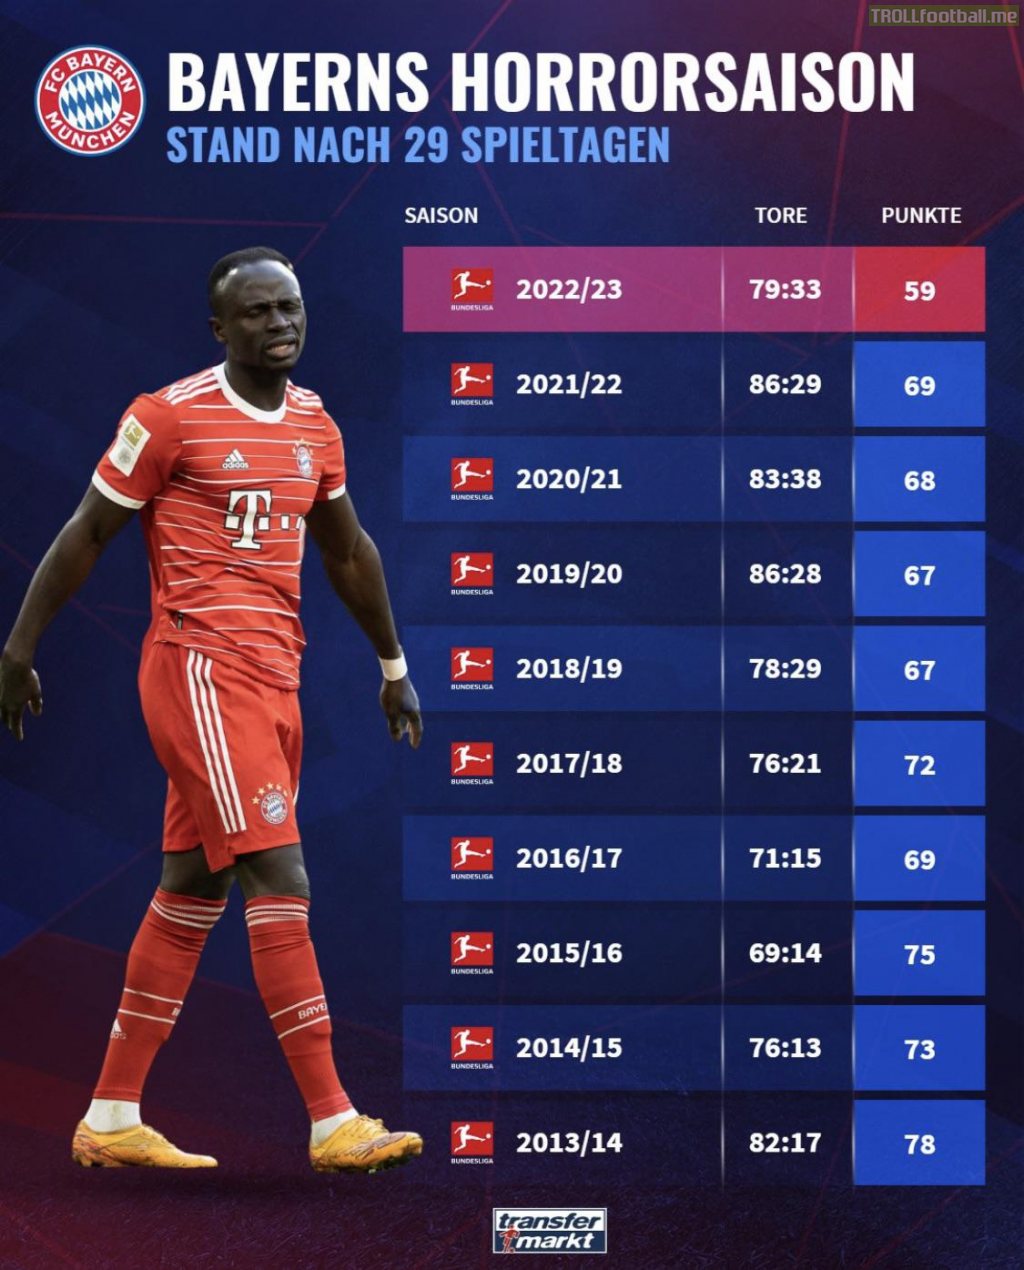 FC Bayern in the Bundesliga after 29 matches this season compared to the last 9 seasons